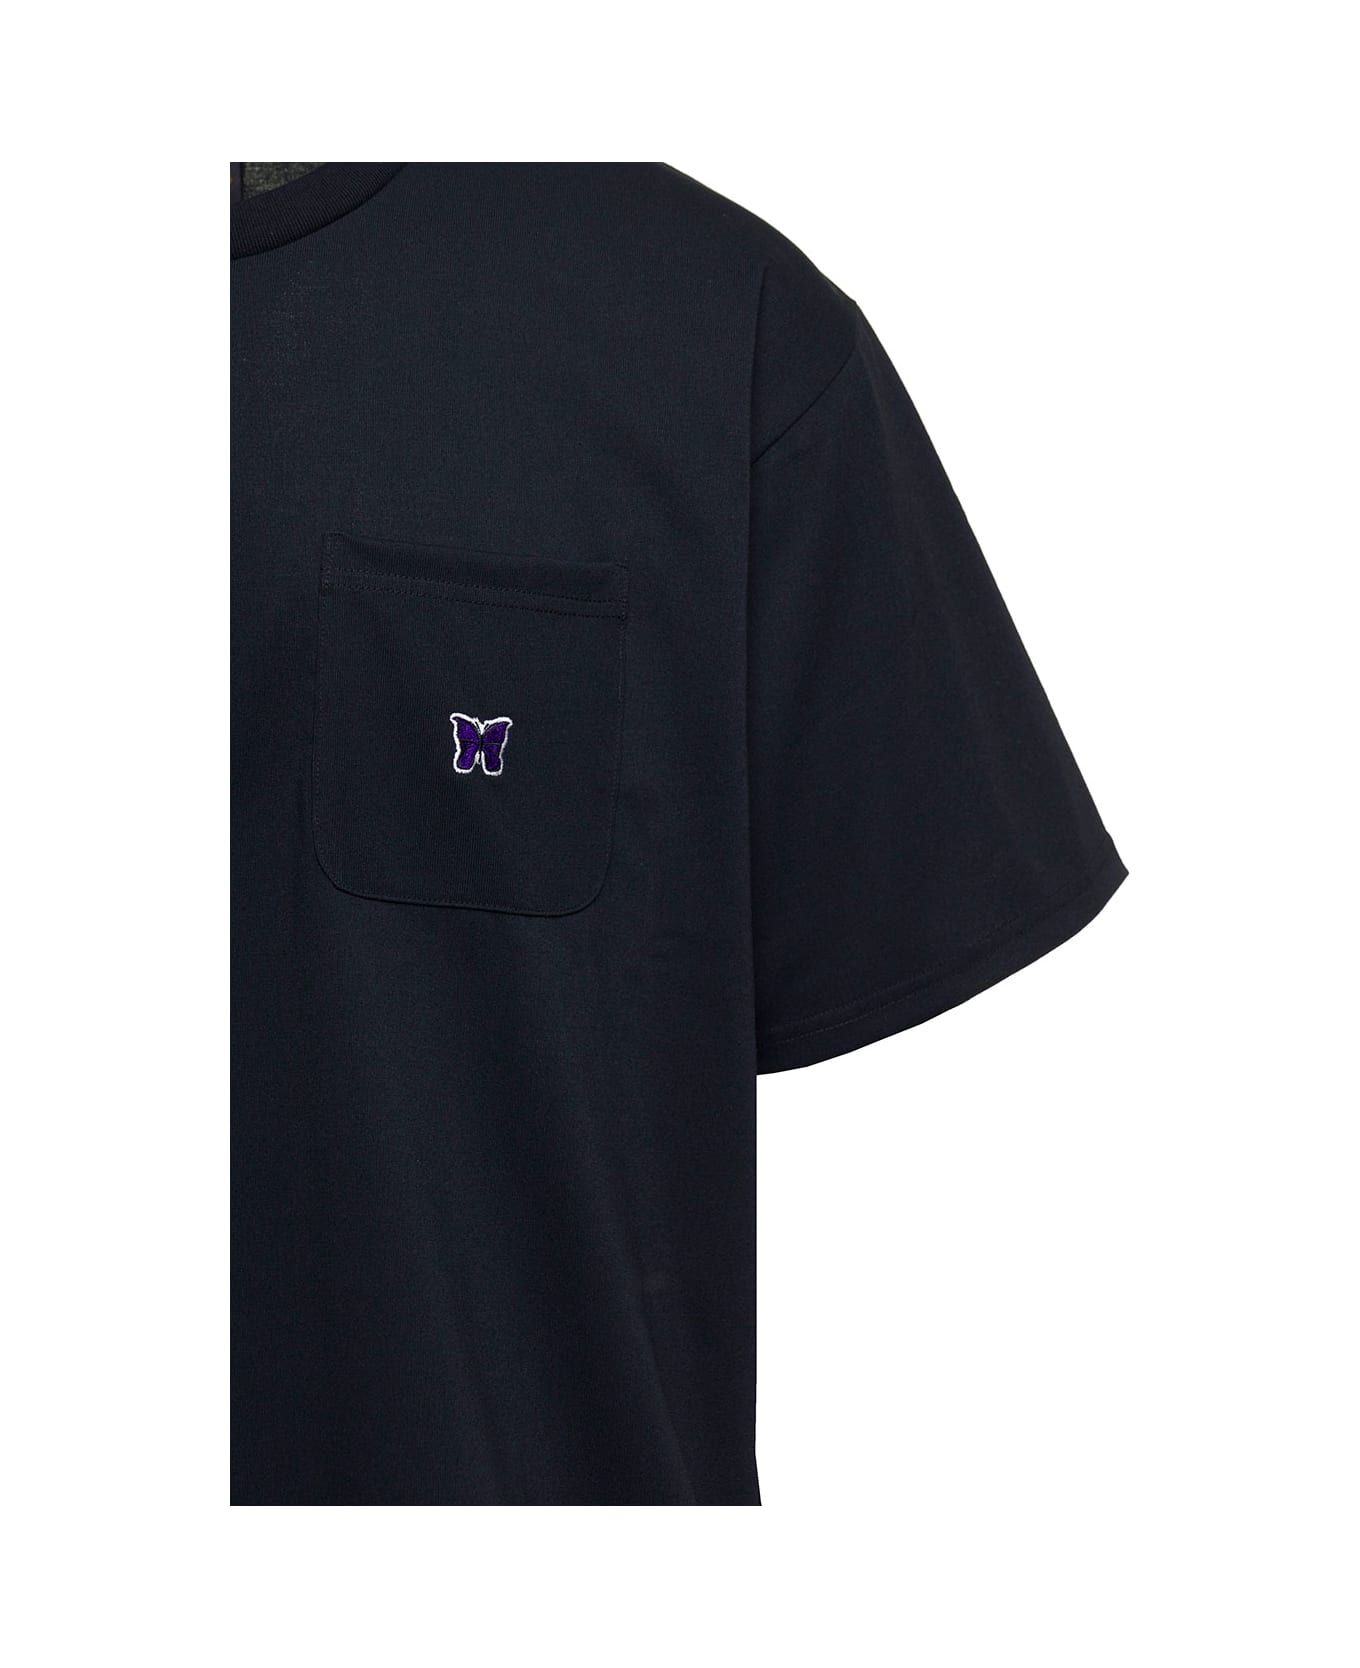 Needles T-shirt With Pocket And Logo In Black Technical Fabric Man - Black